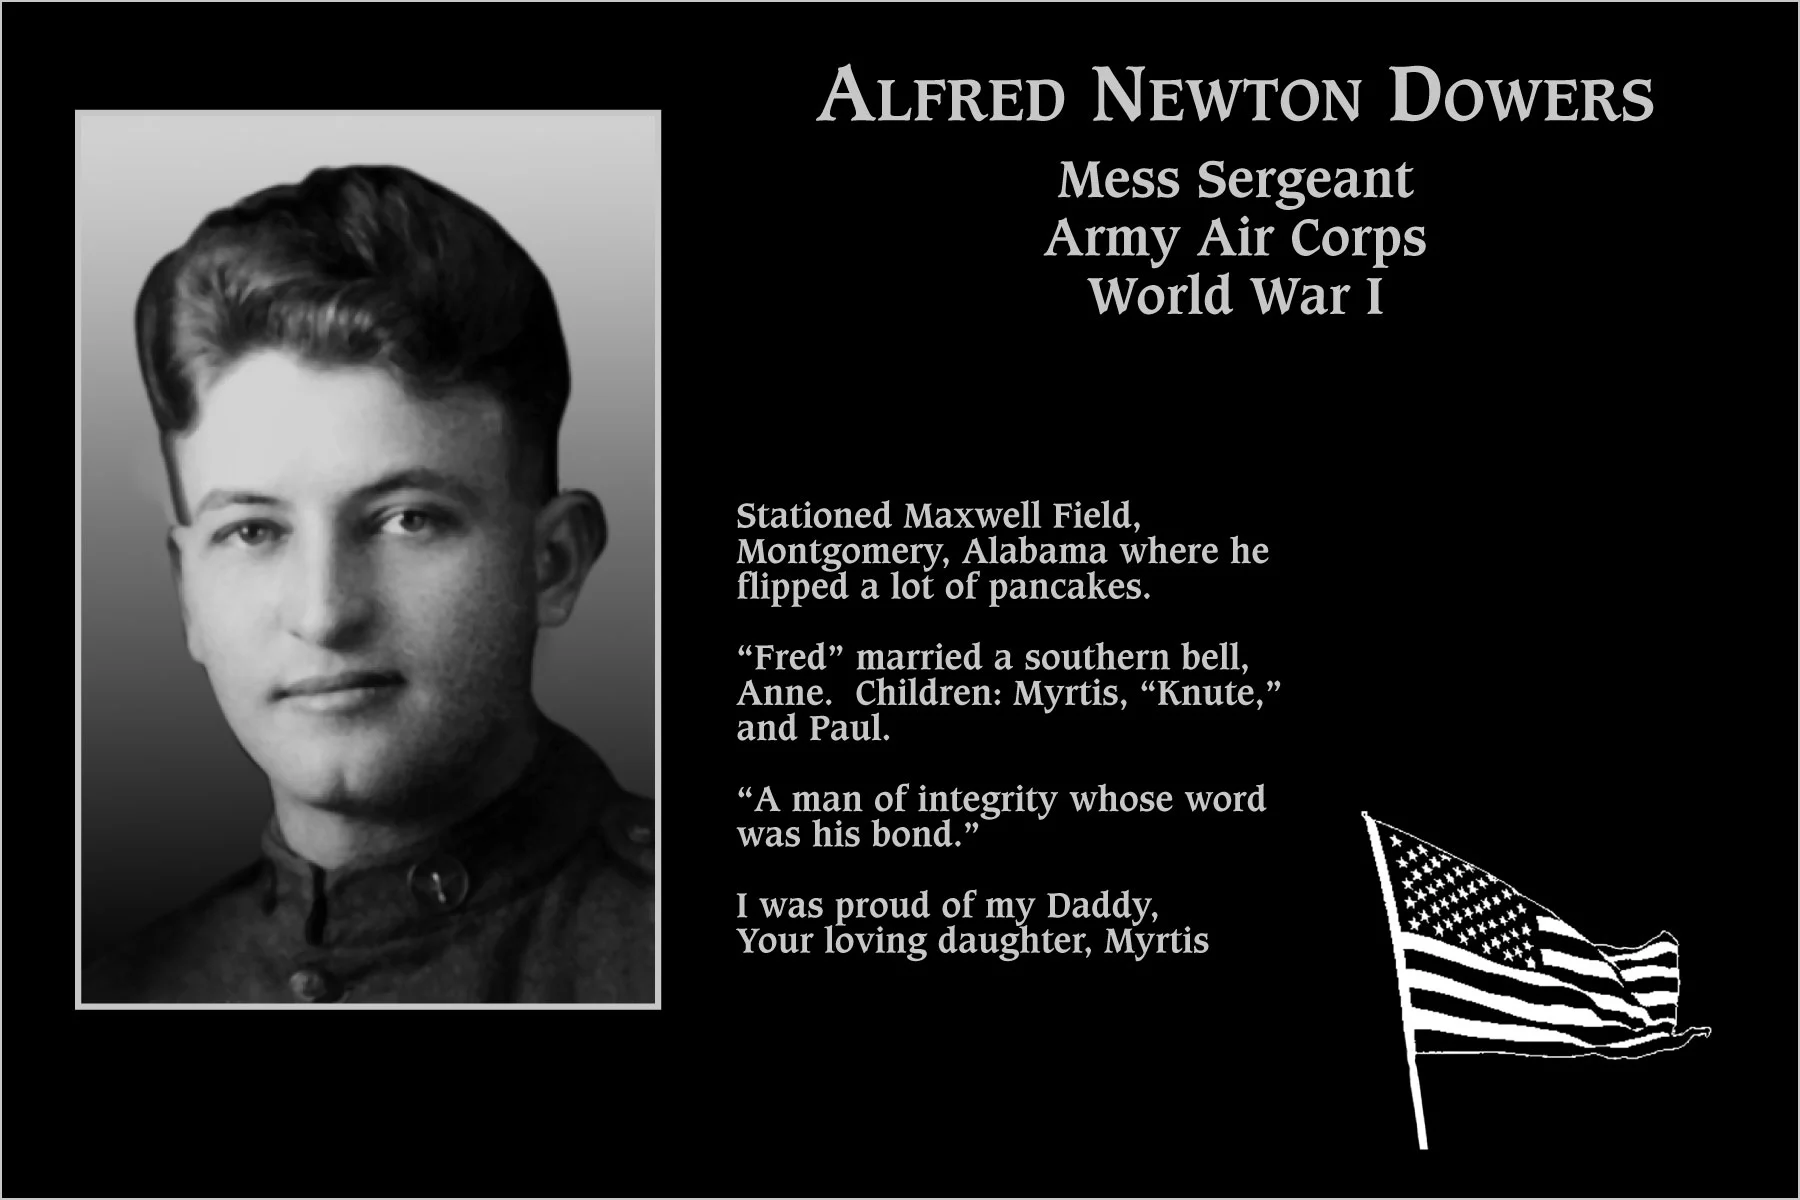 Alfred Newton “Fred” Dowers